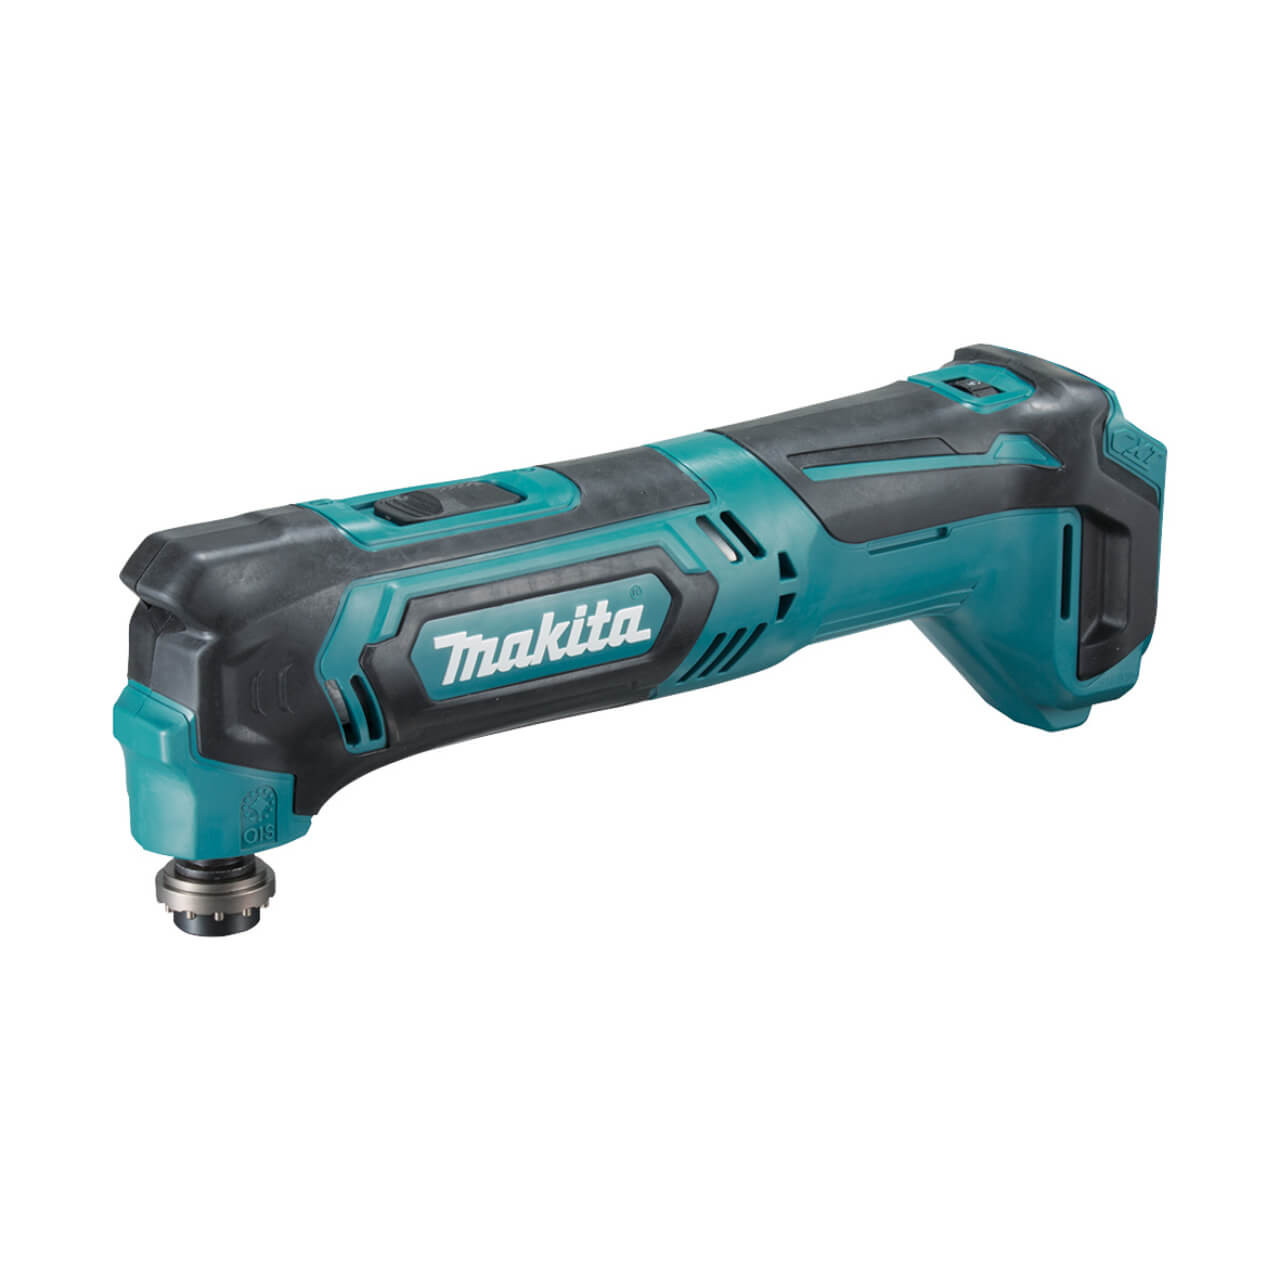 Makita 12V Max Multi-tool - Includes 2 x 2.0Ah Batteries. Rapid Charger & Case